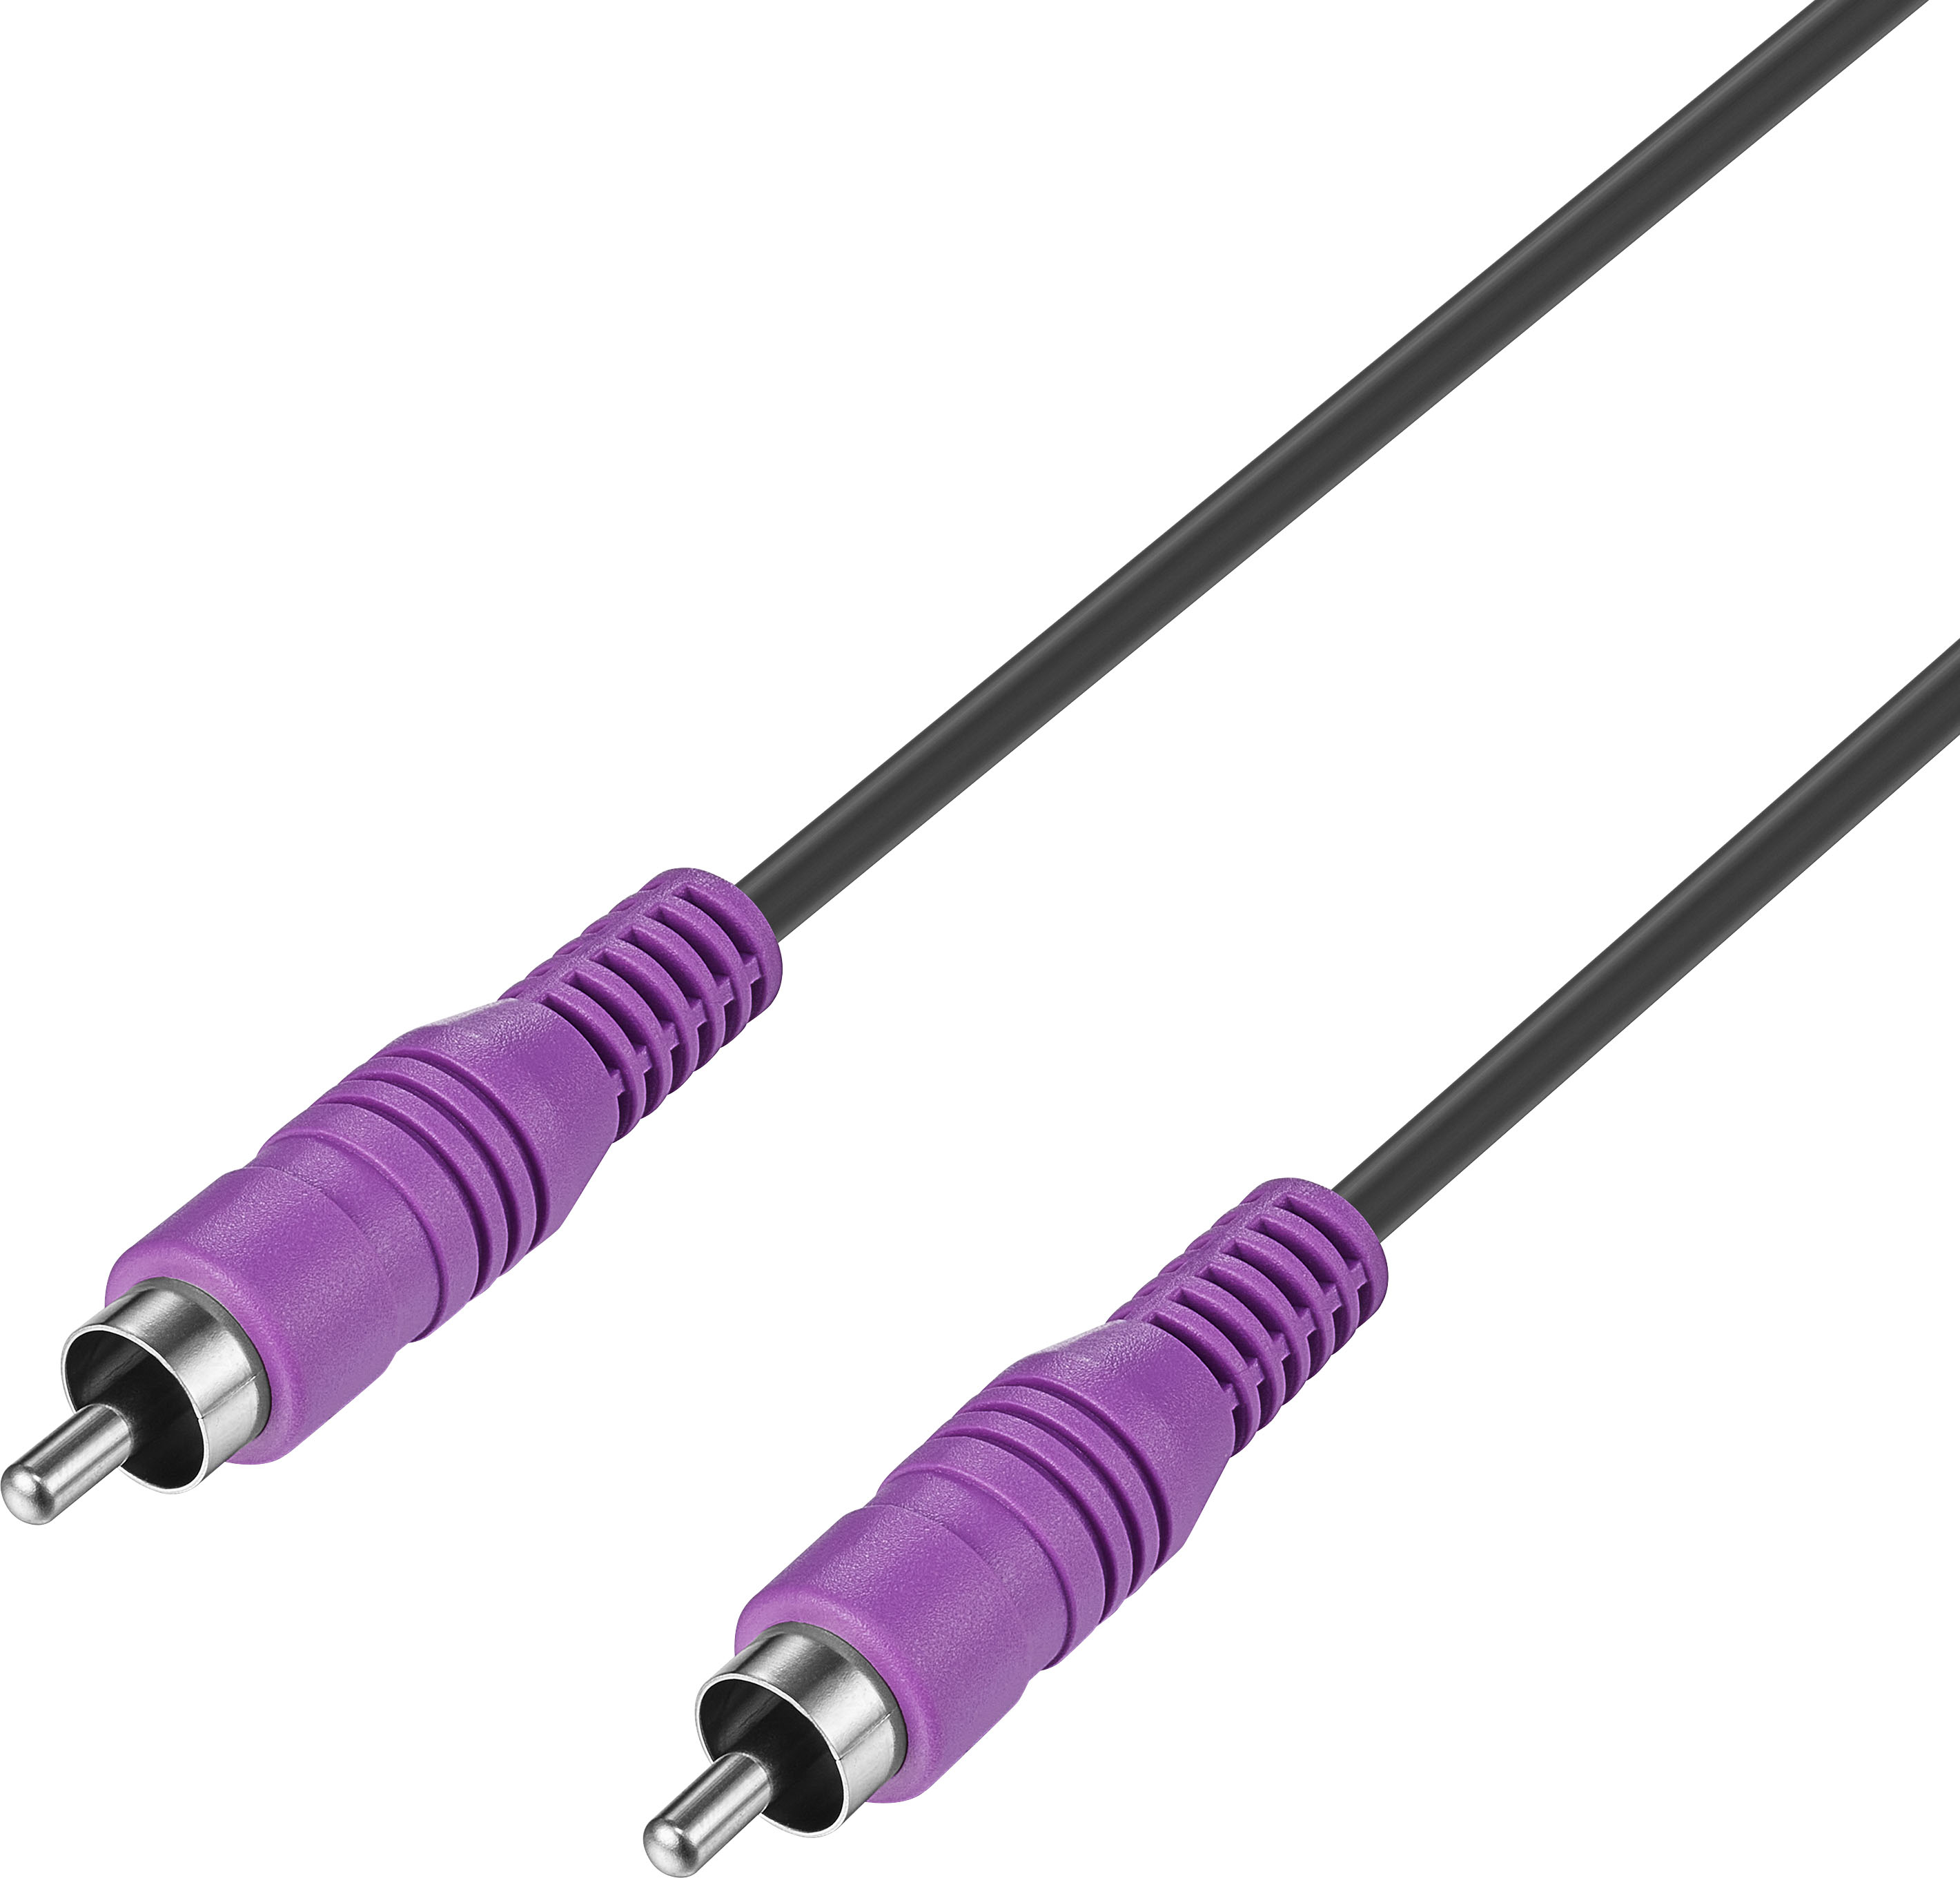 Best Buy essentials™ 25' Stereo Audio RCA Cable Black BE-HCL324